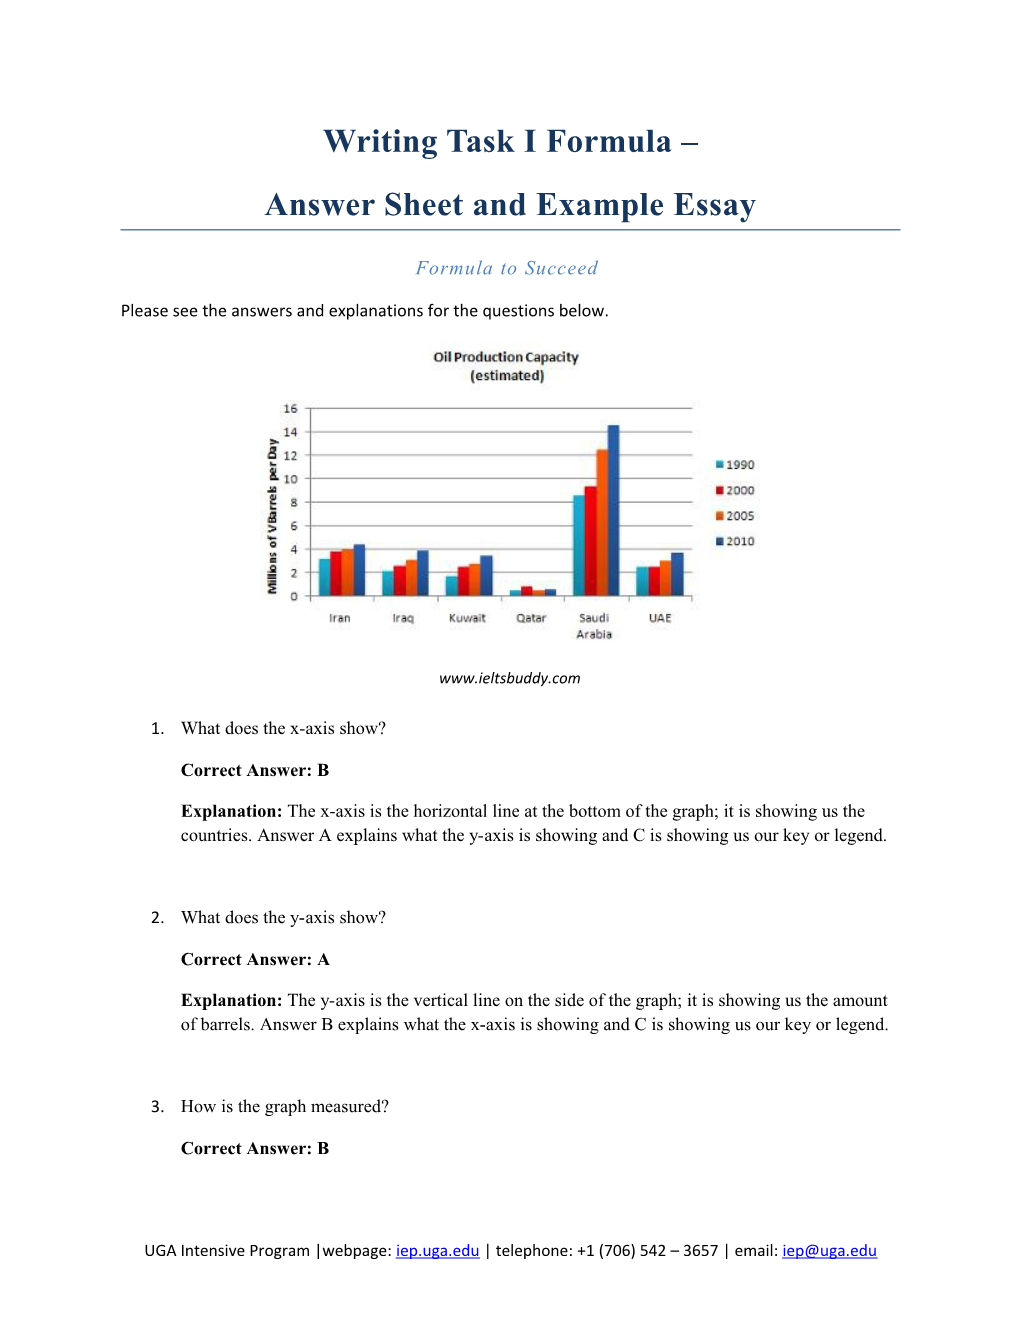 Answer Sheet and Example Essay